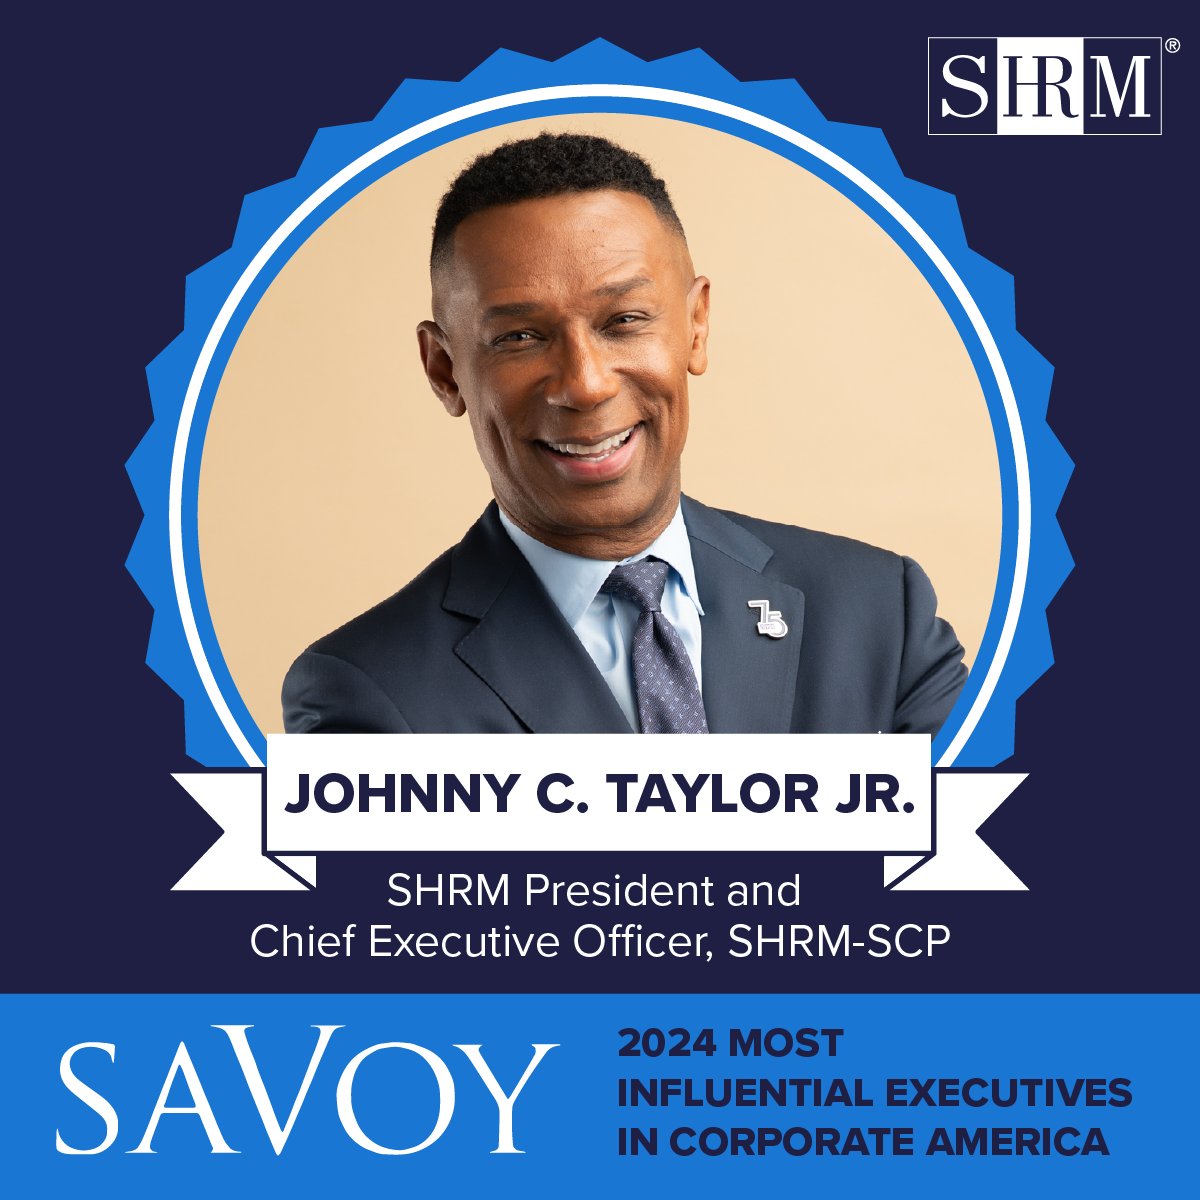 SHRM President and CEO, @JohnnyCTaylorJr, made @savoynetwork's 2024 list of Most Influential Executives in Corporate America. This honor celebrates his dedication to driving change in the workplace and advancing diversity, equity, and inclusion. shrm.co/nc082b